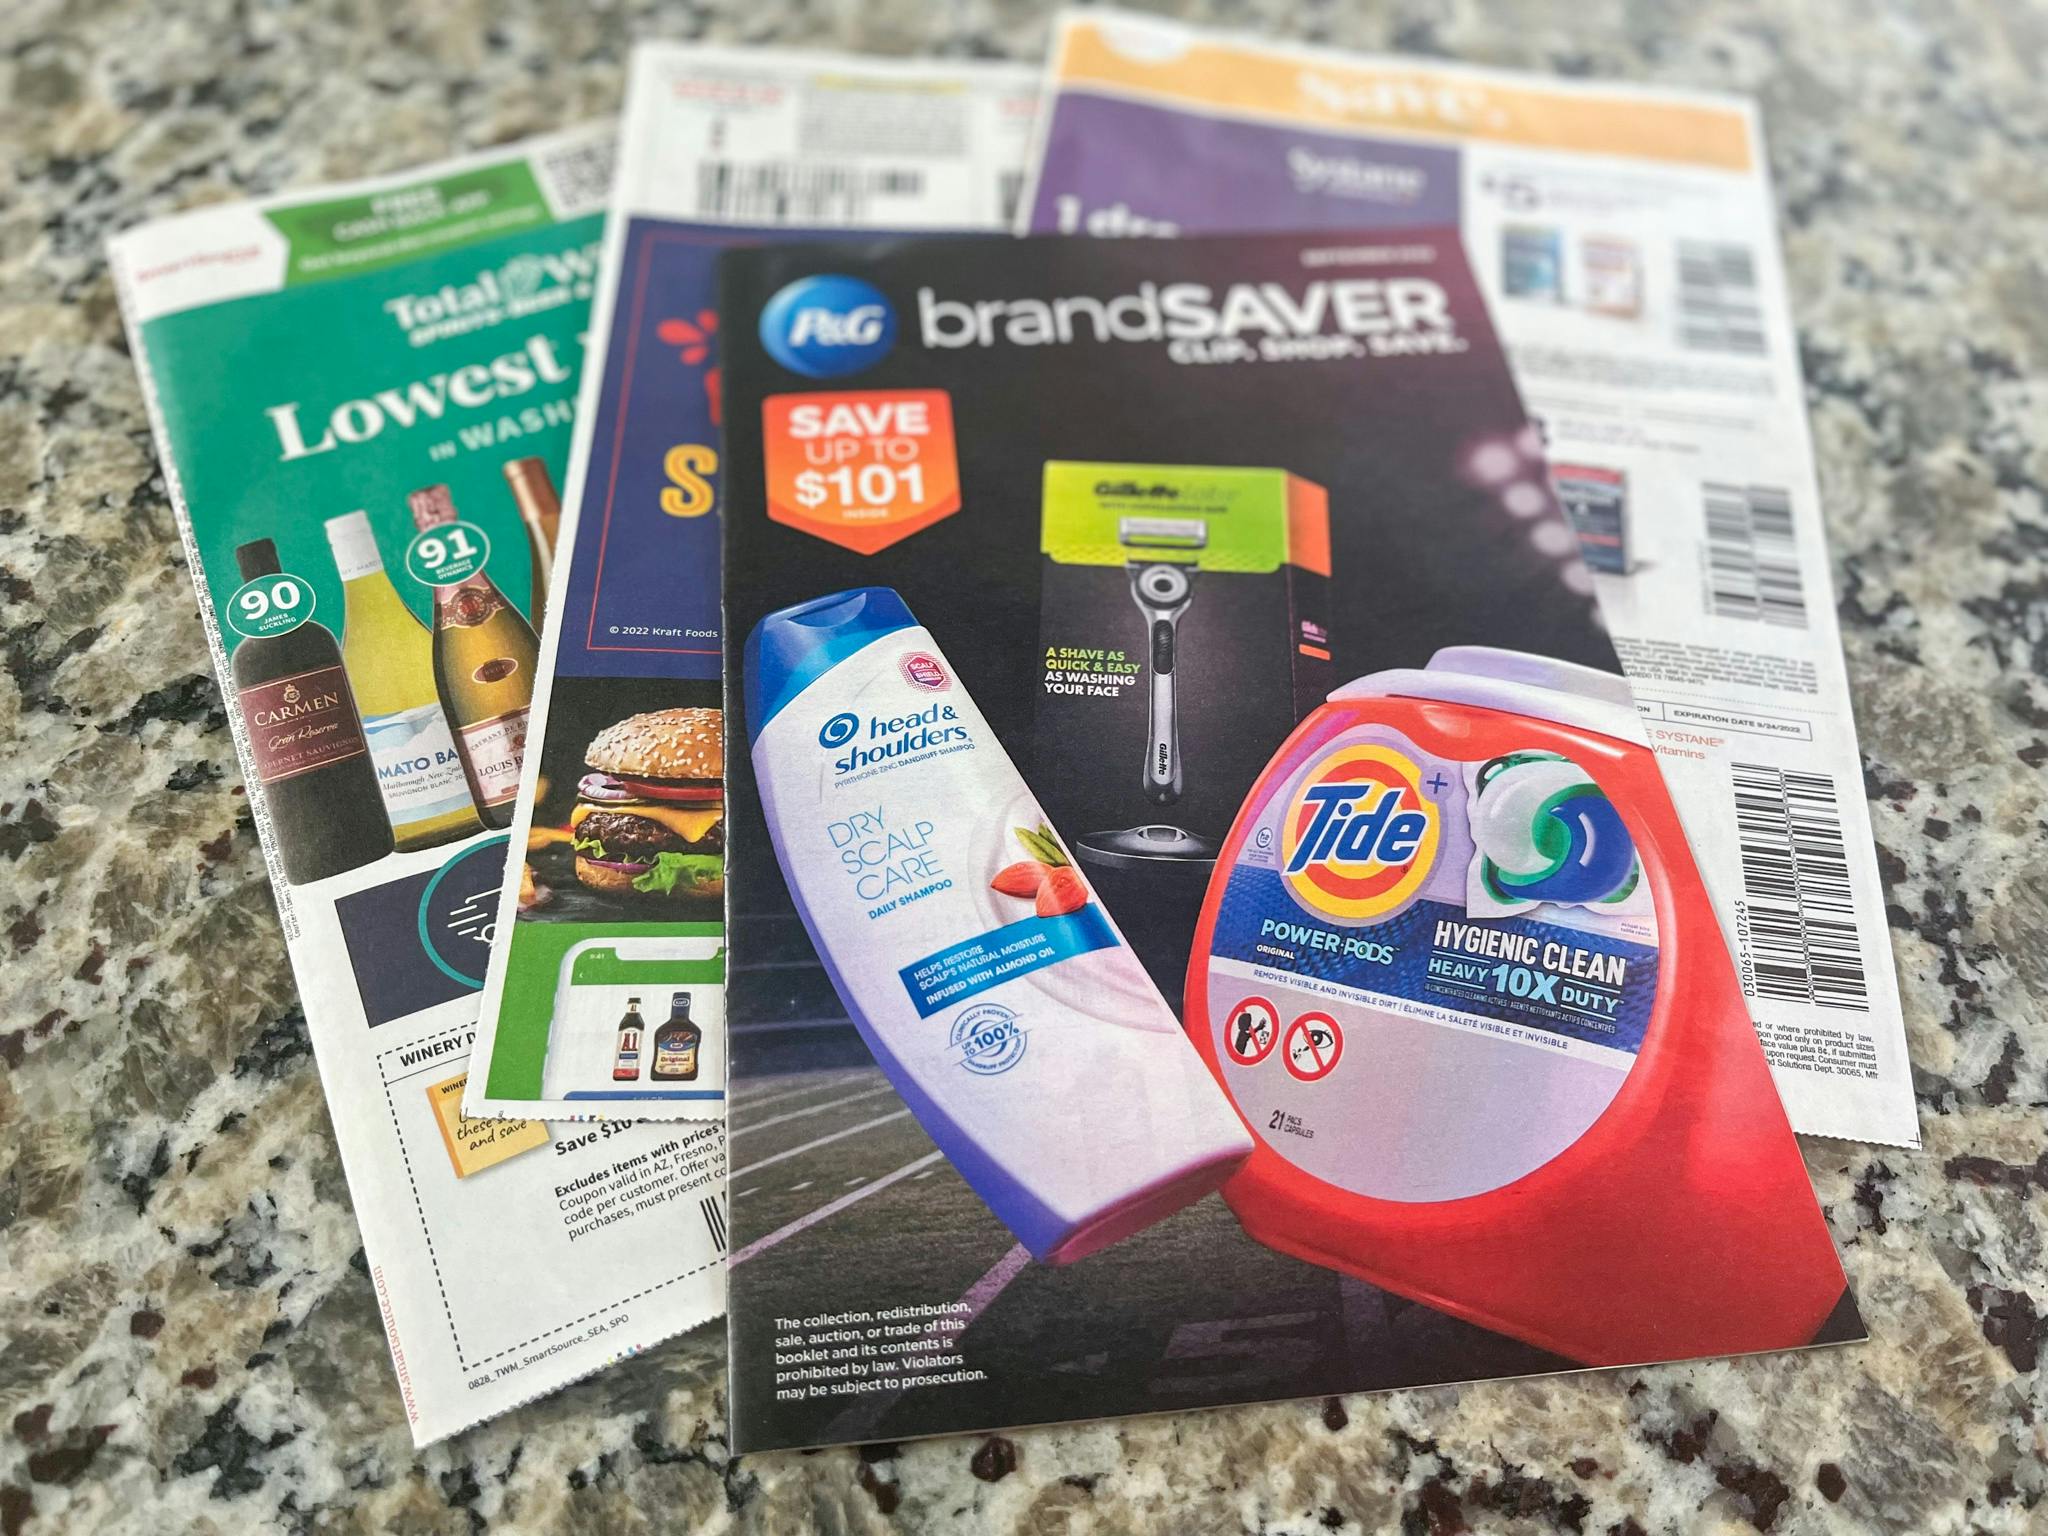 P&G Says Shoppers Are Happily Paying Higher Prices - Coupons in the News